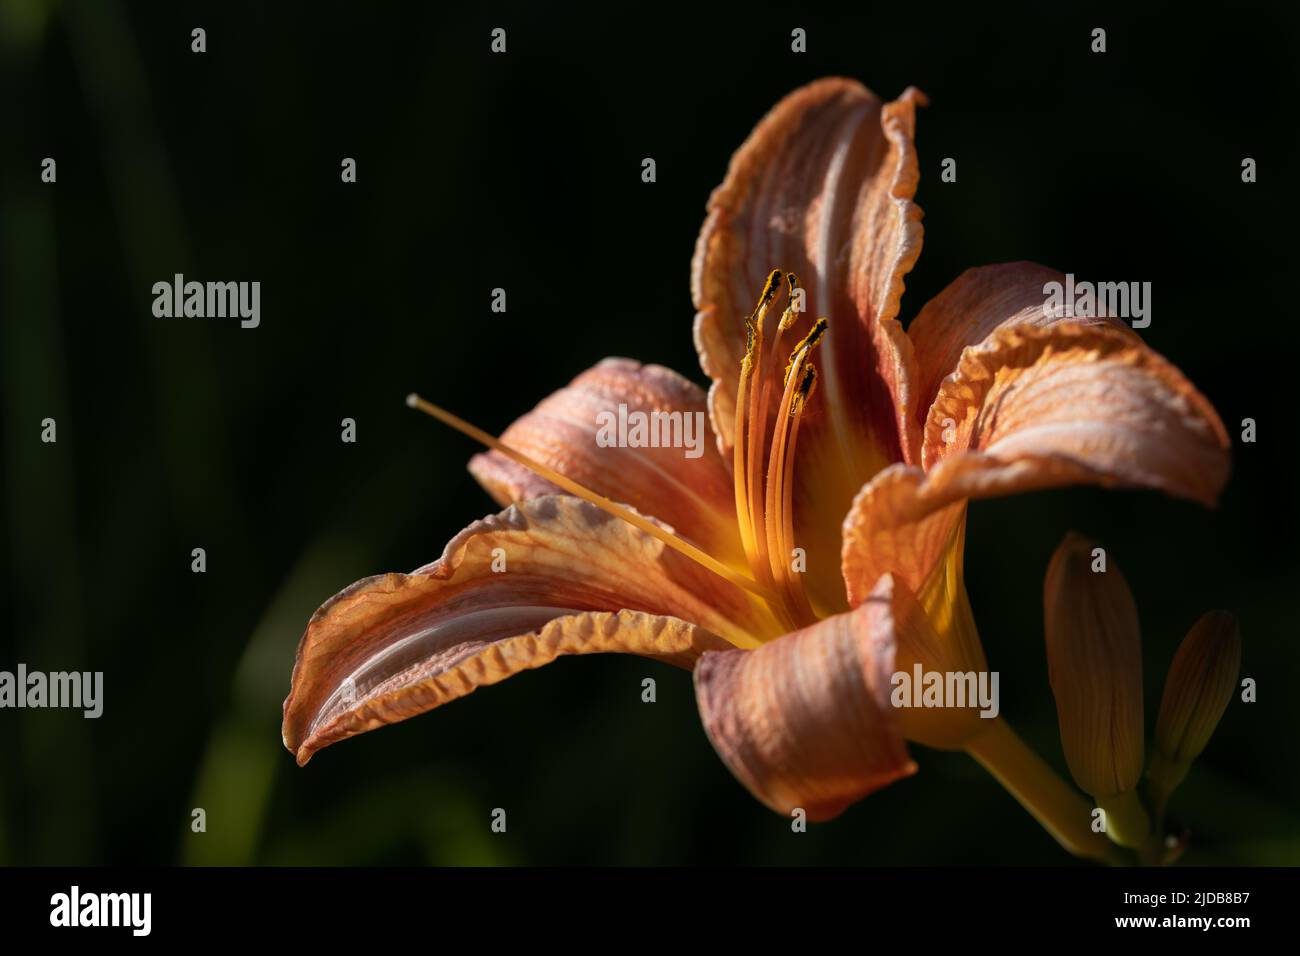 Close-up of the orange flower of a daylily (Hemerocallis), against a dark background in nature Stock Photo